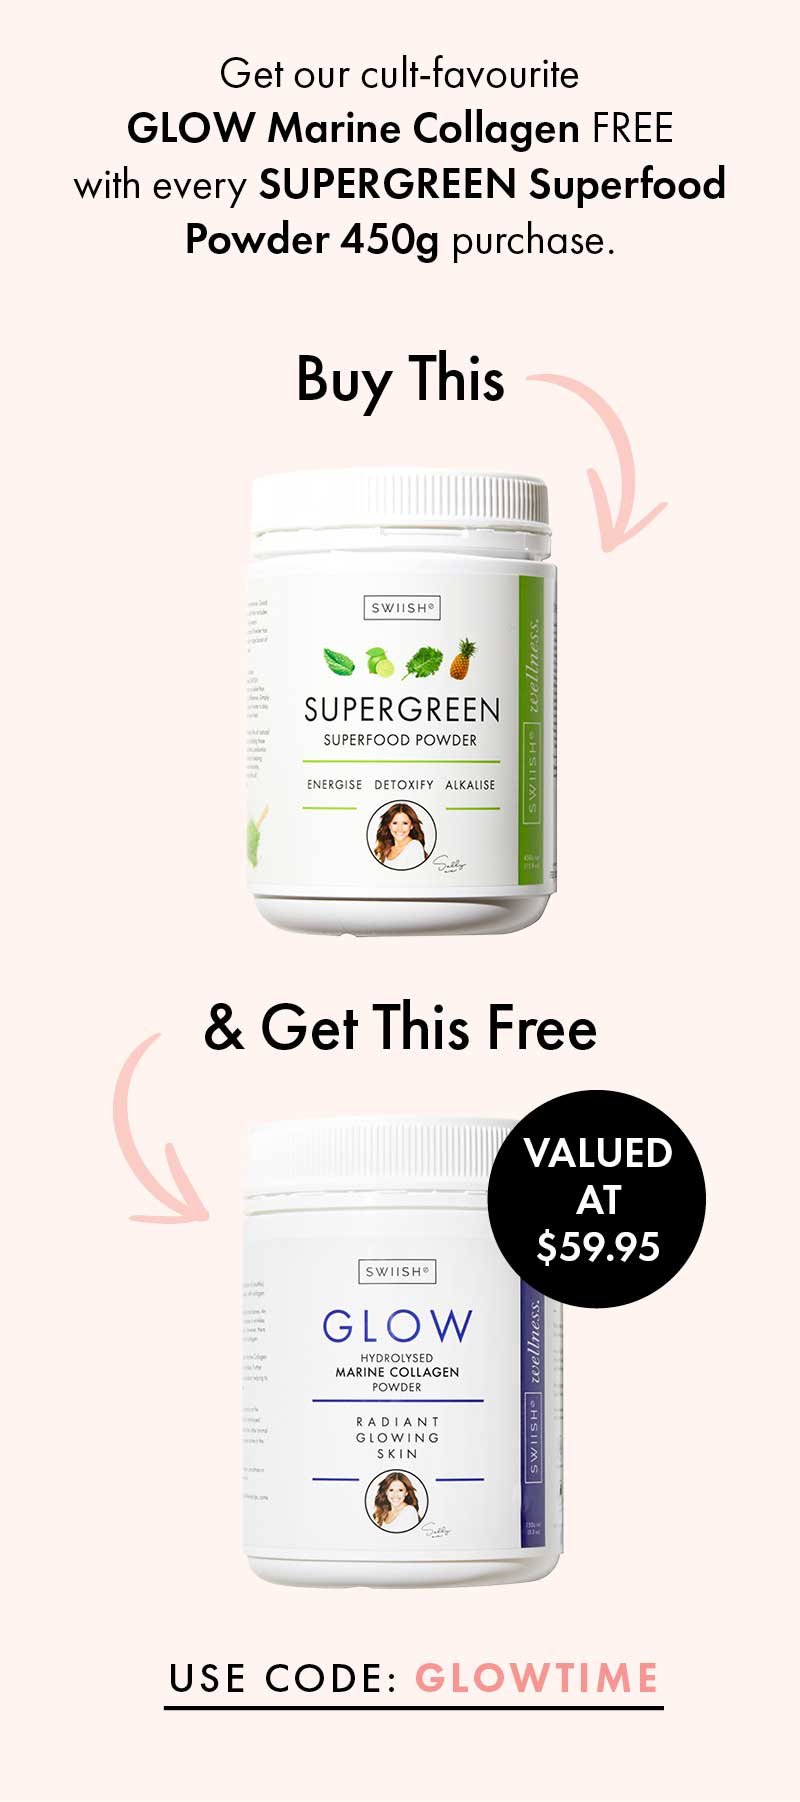 Get our cult-favourite GLOW Marine Collagen FREE with every SUPERGREEN Superfood Powder 450g purchase. 